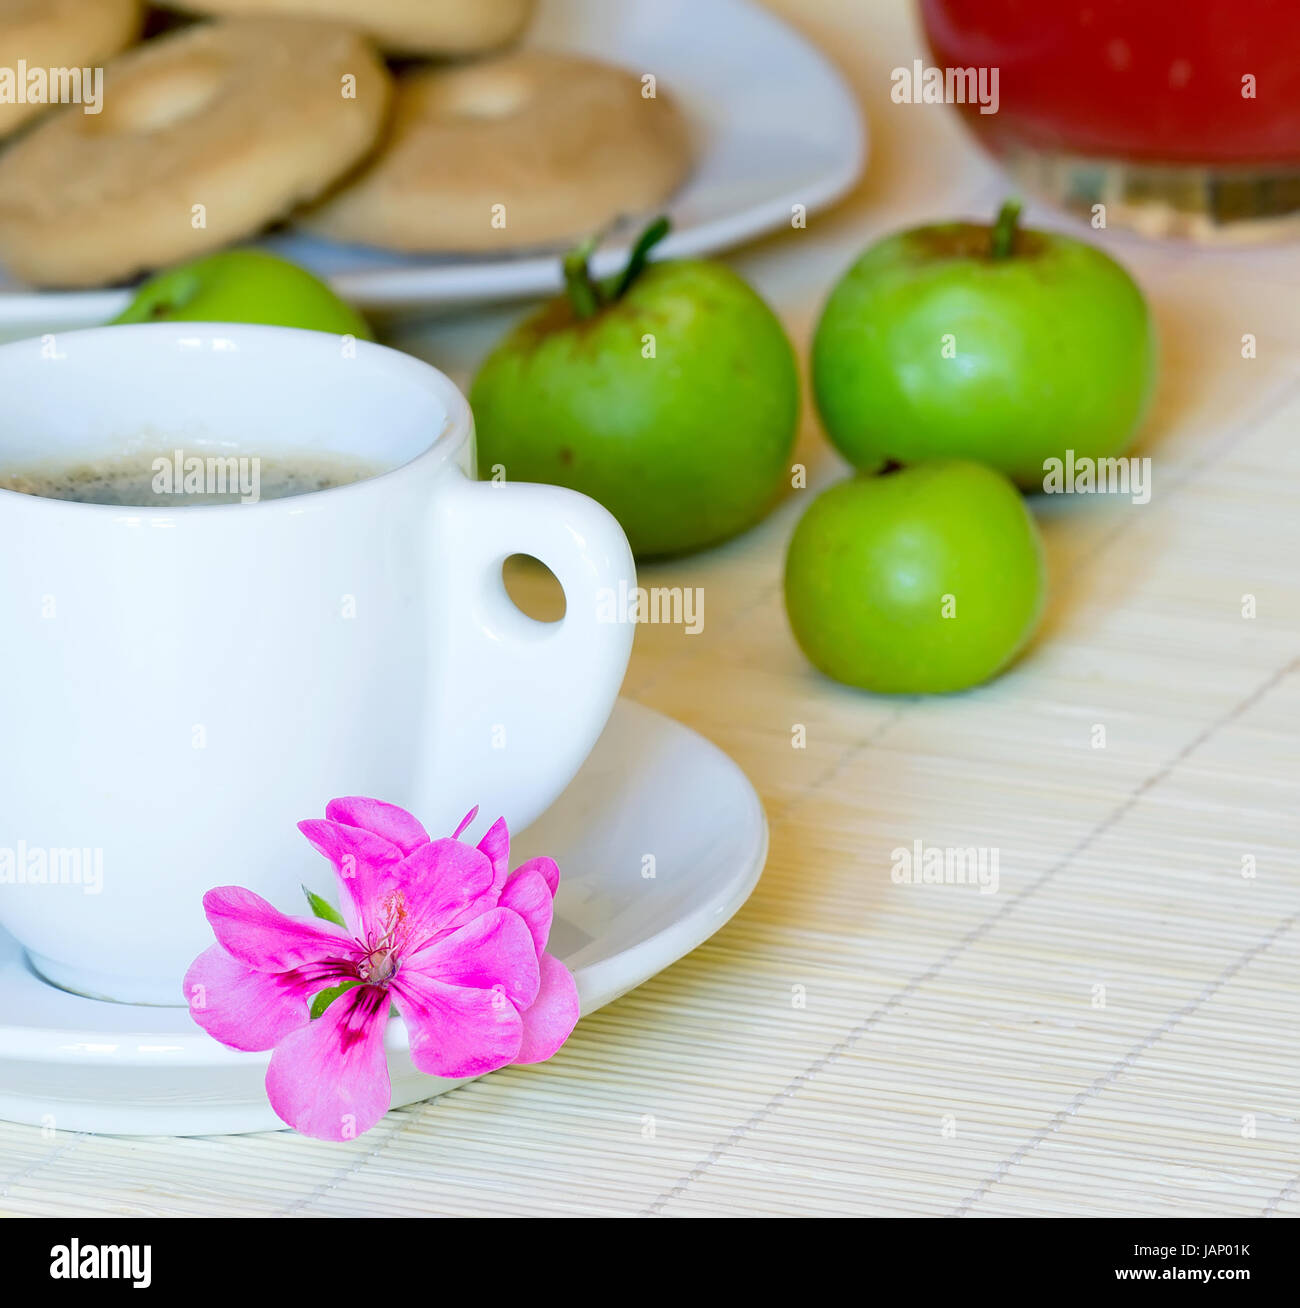 breakfast set with coffee, apples, cookies, fruit juice and a decorative flower Stock Photo